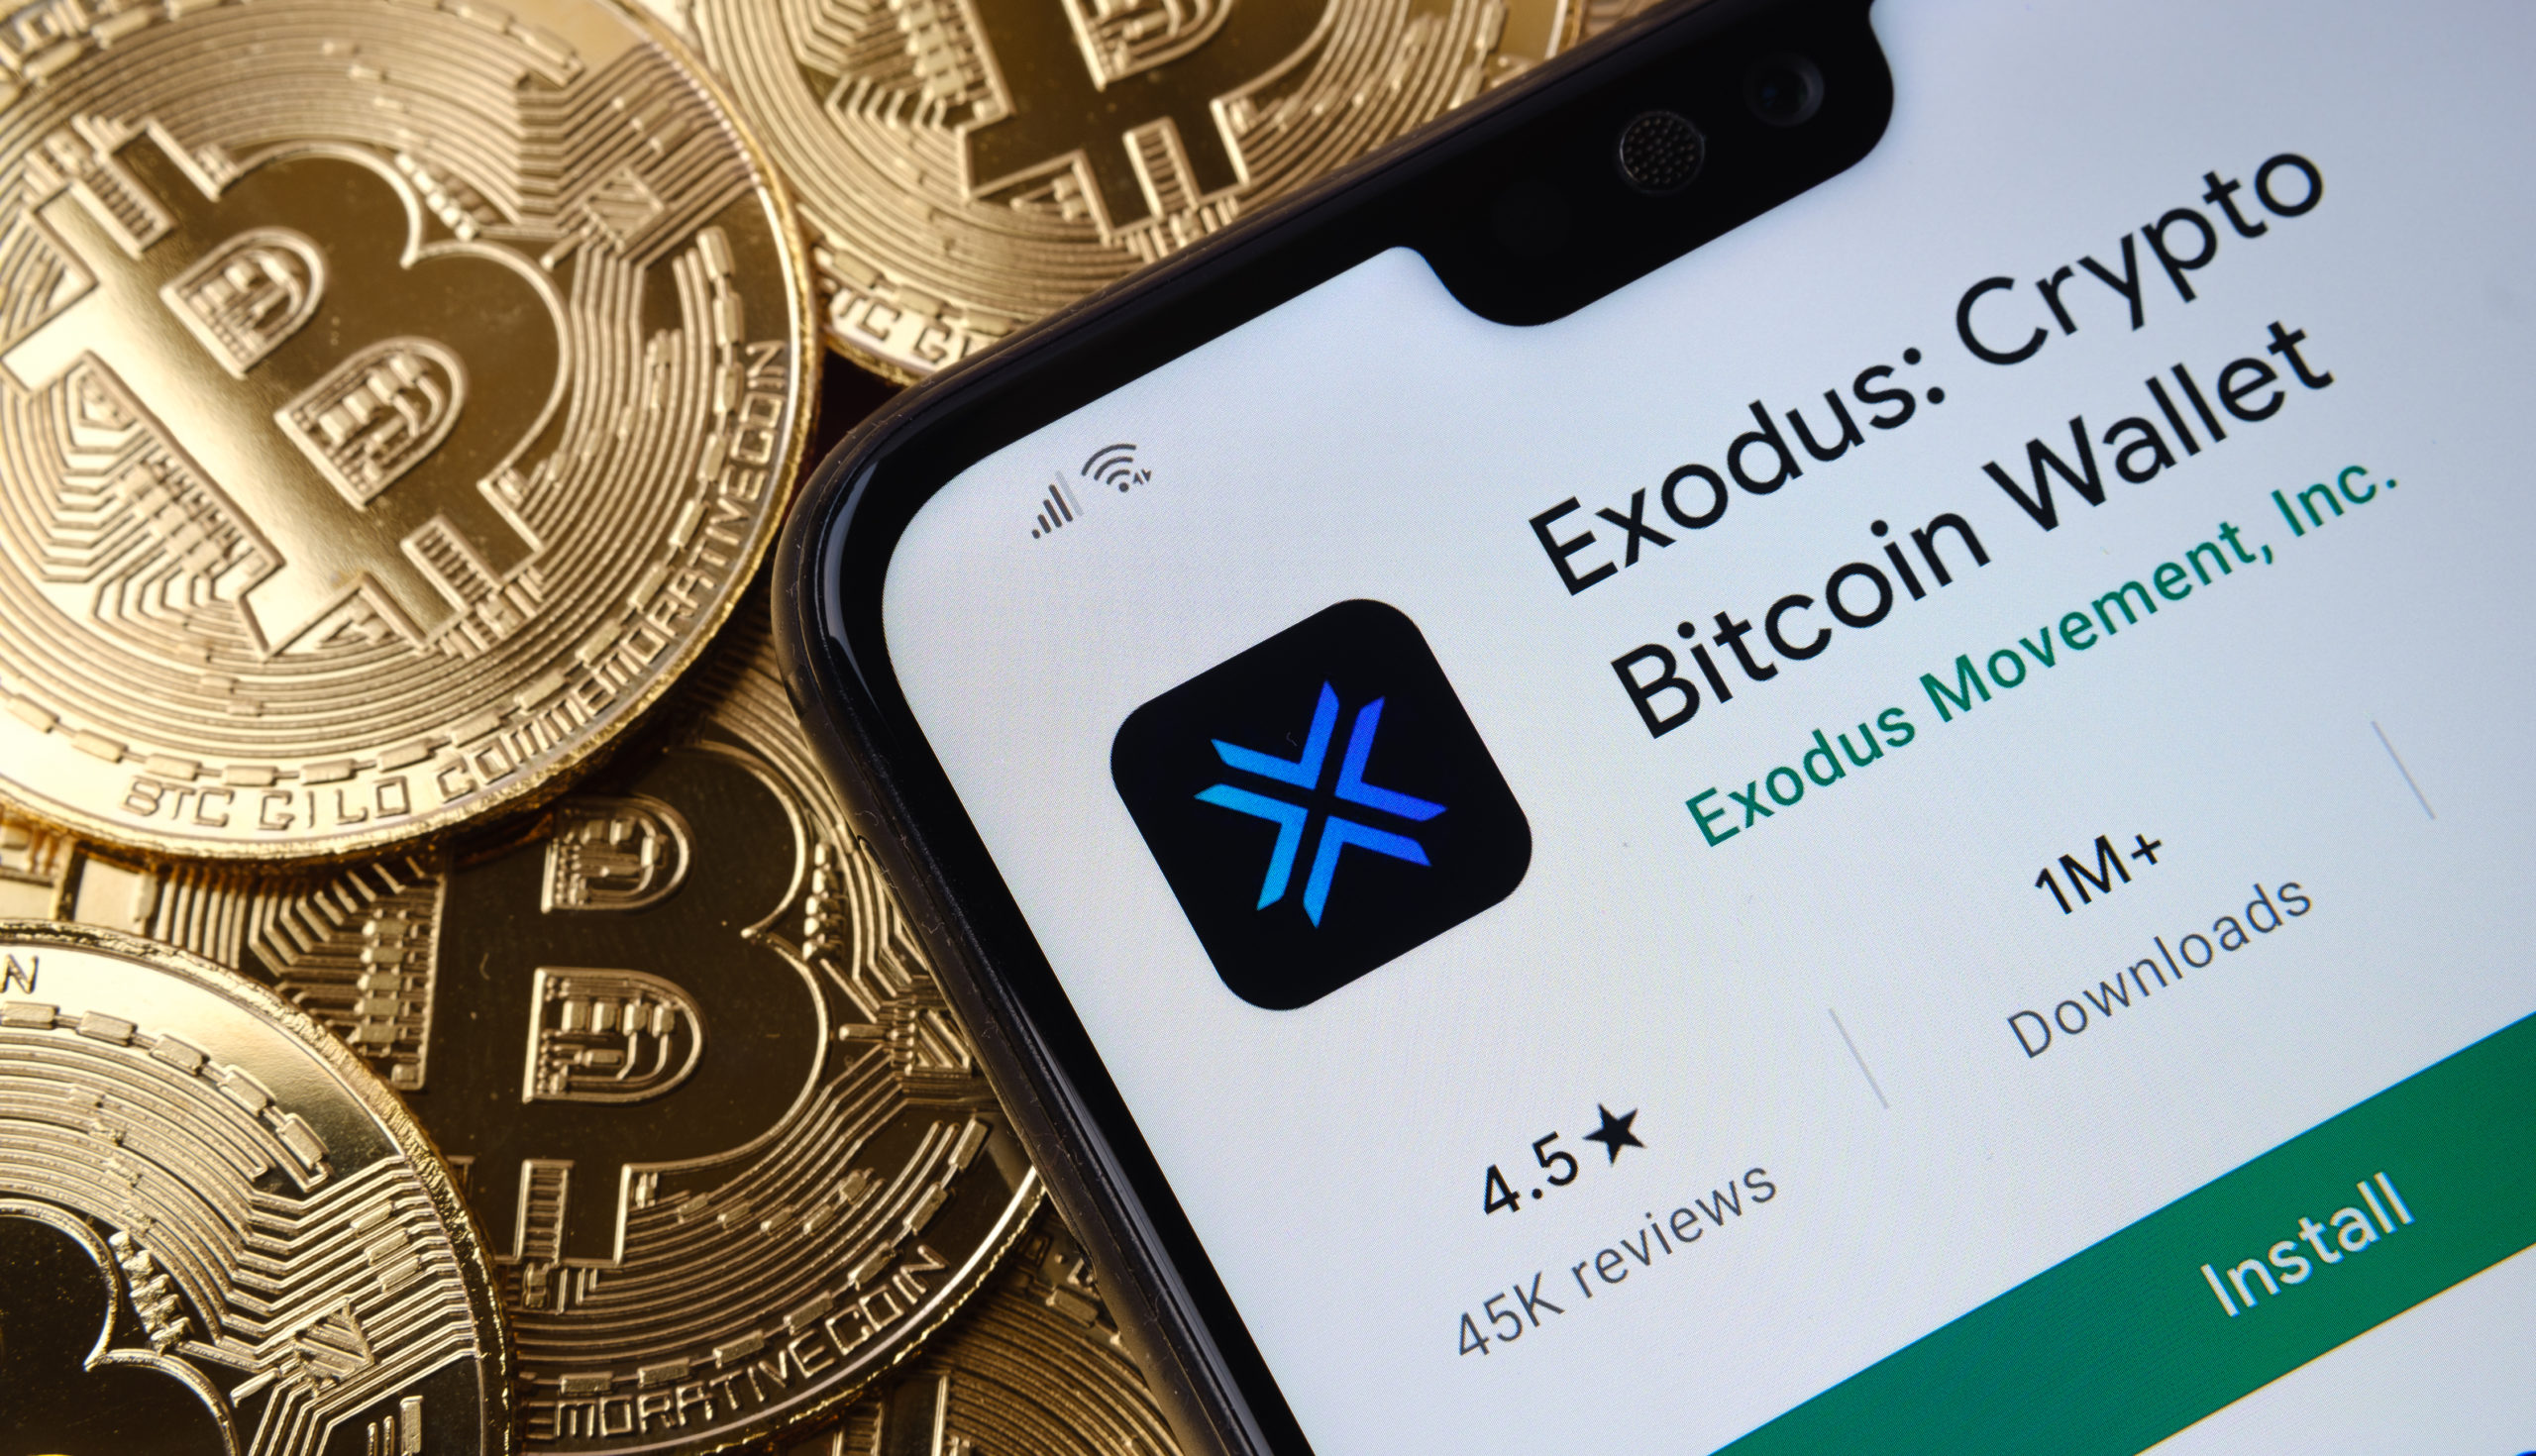 Exodus software on a mobile set on a bed of Bitcoins